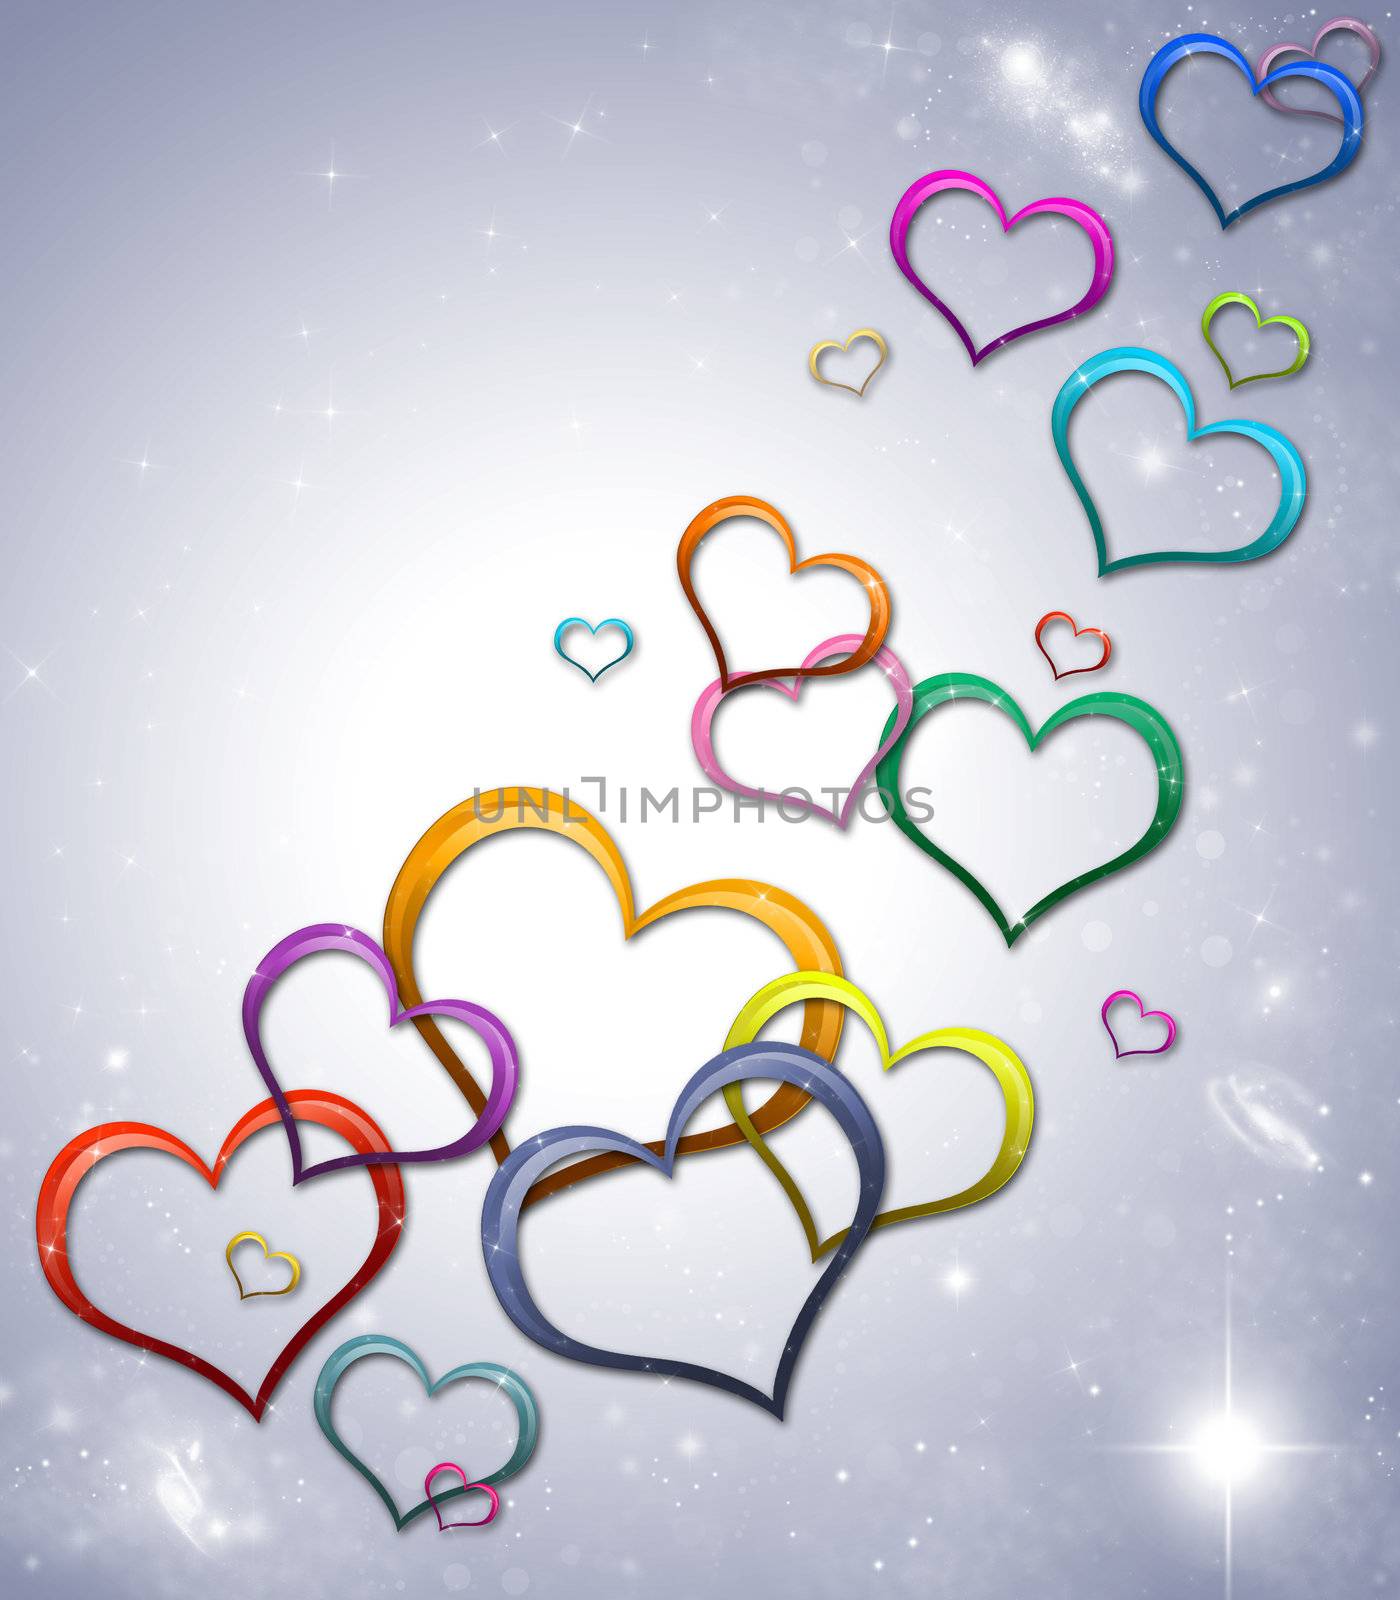 Valentines Day Card with colorful hearts and stars on starry background
